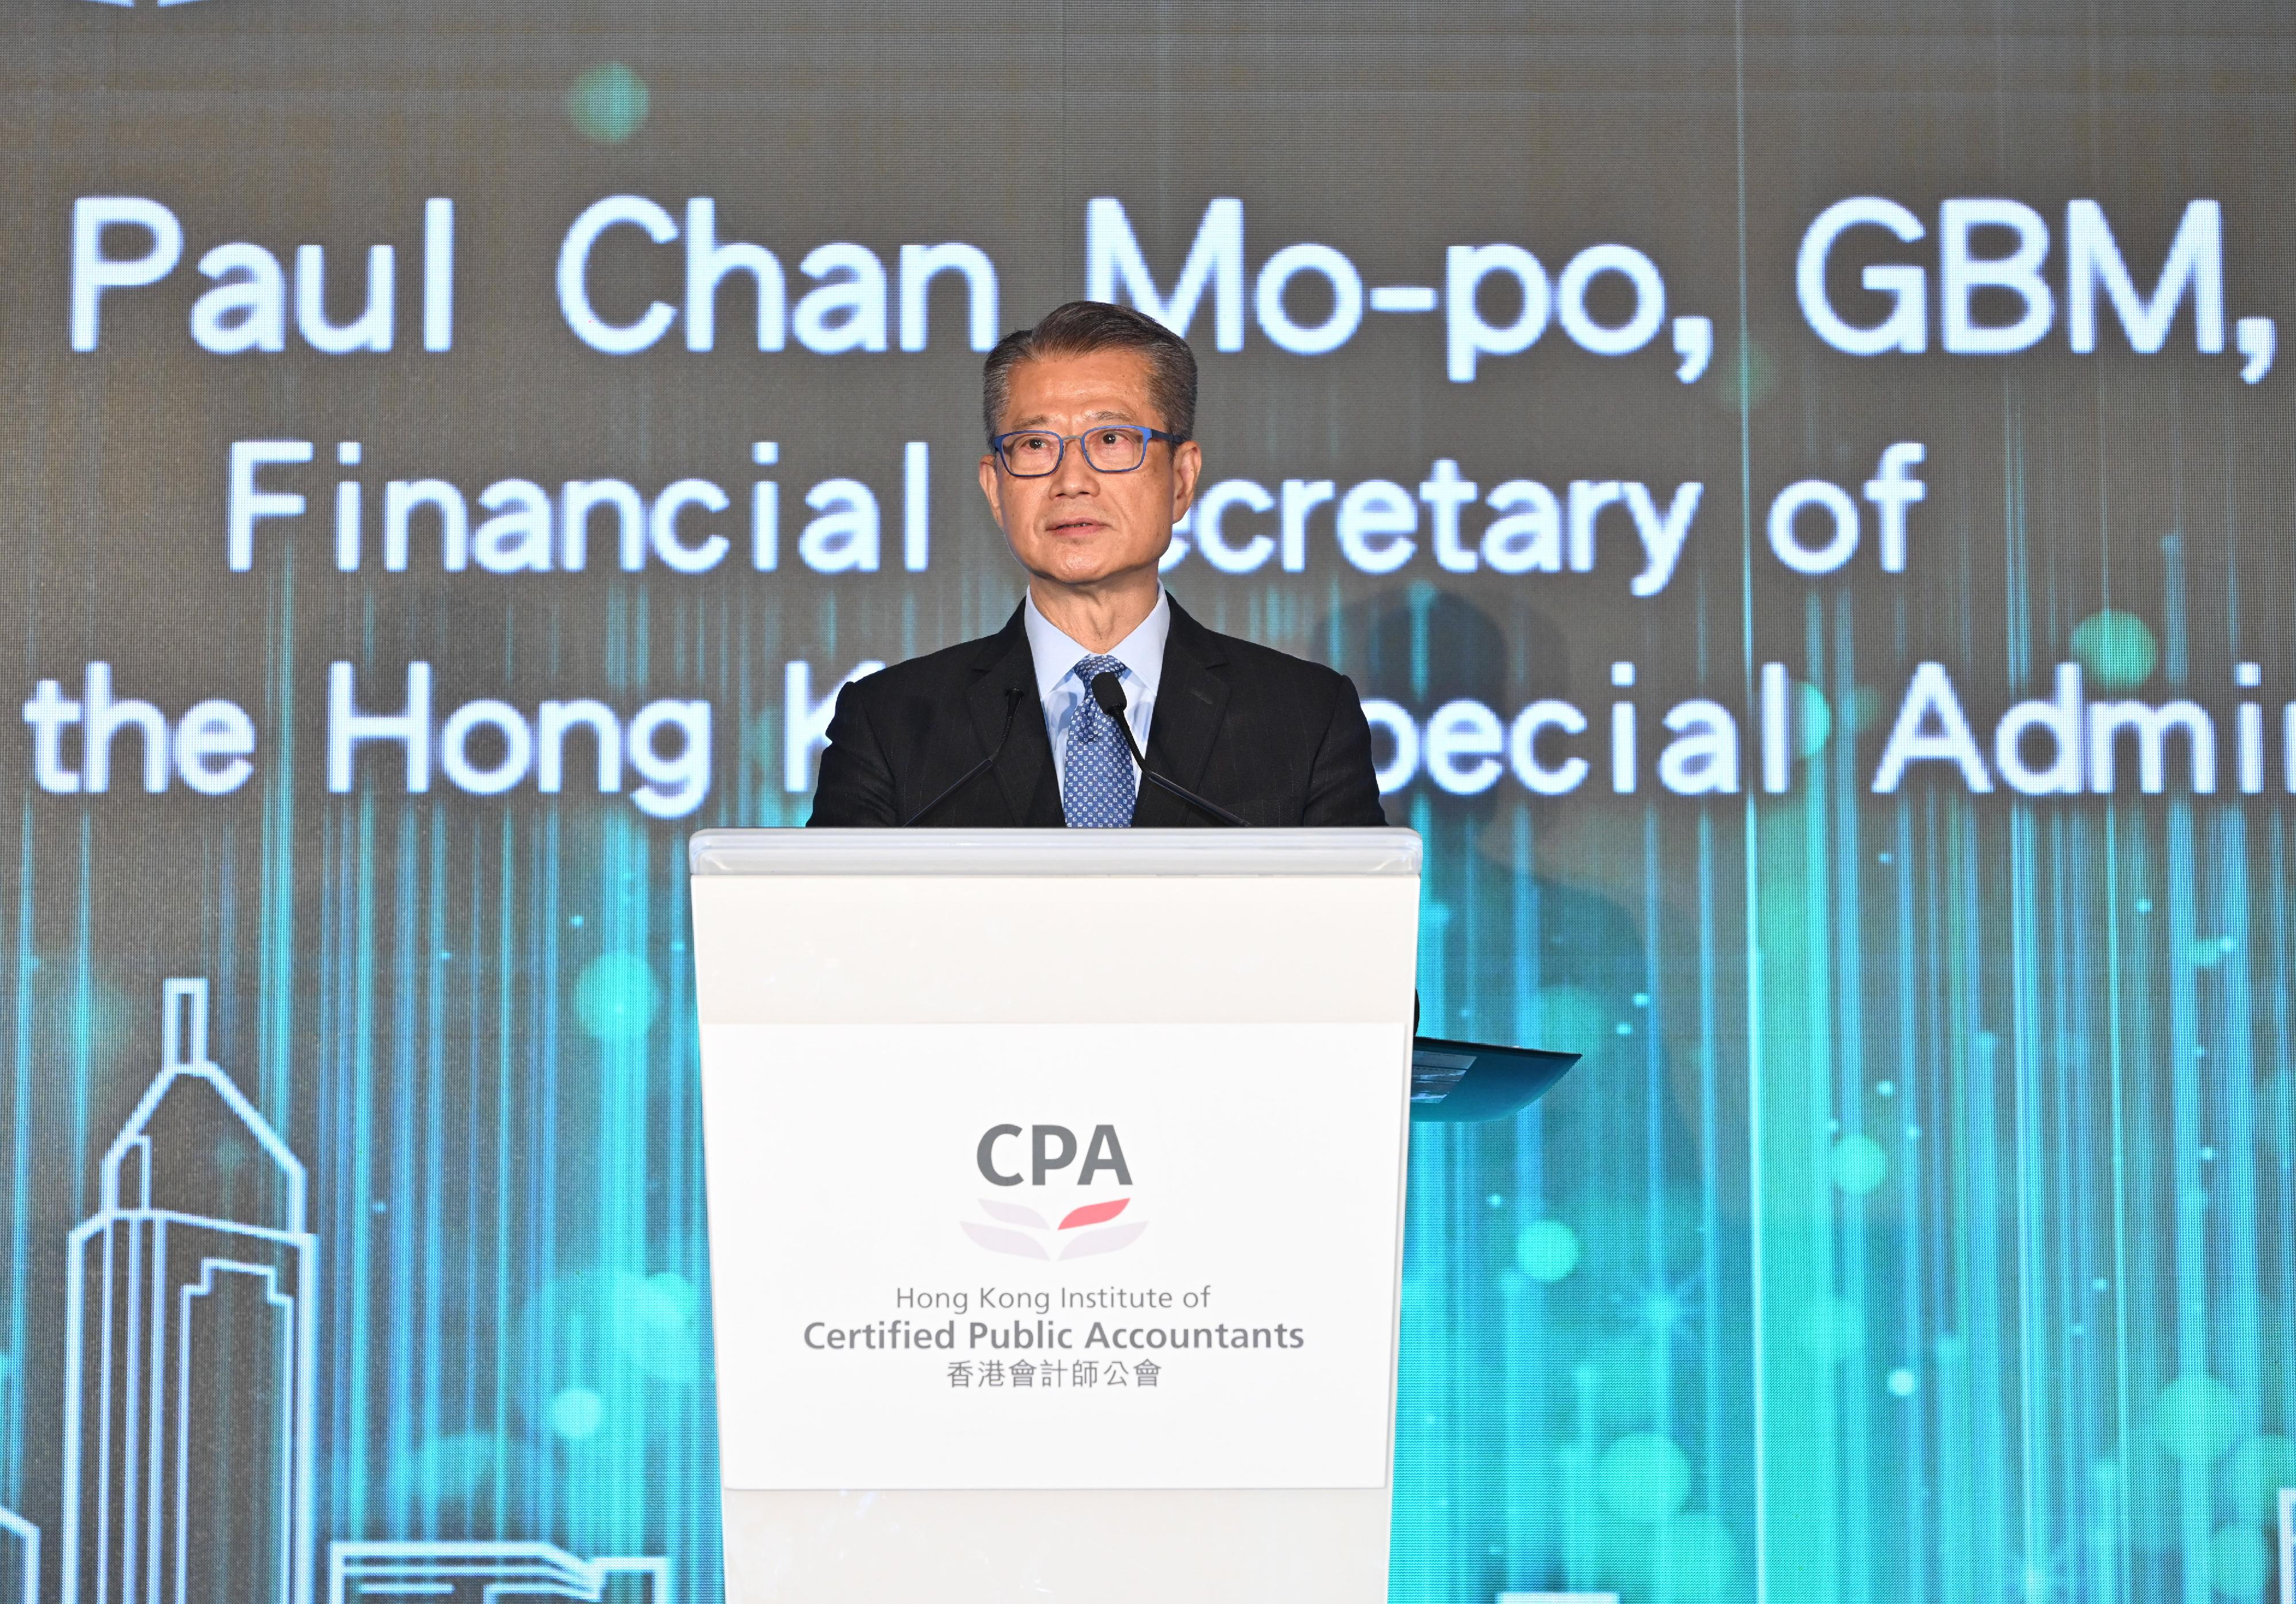 The Financial Secretary, Mr Paul Chan, speaks at the Hong Kong Institute of Certified Public Accountants Annual Dinner today (December 5).